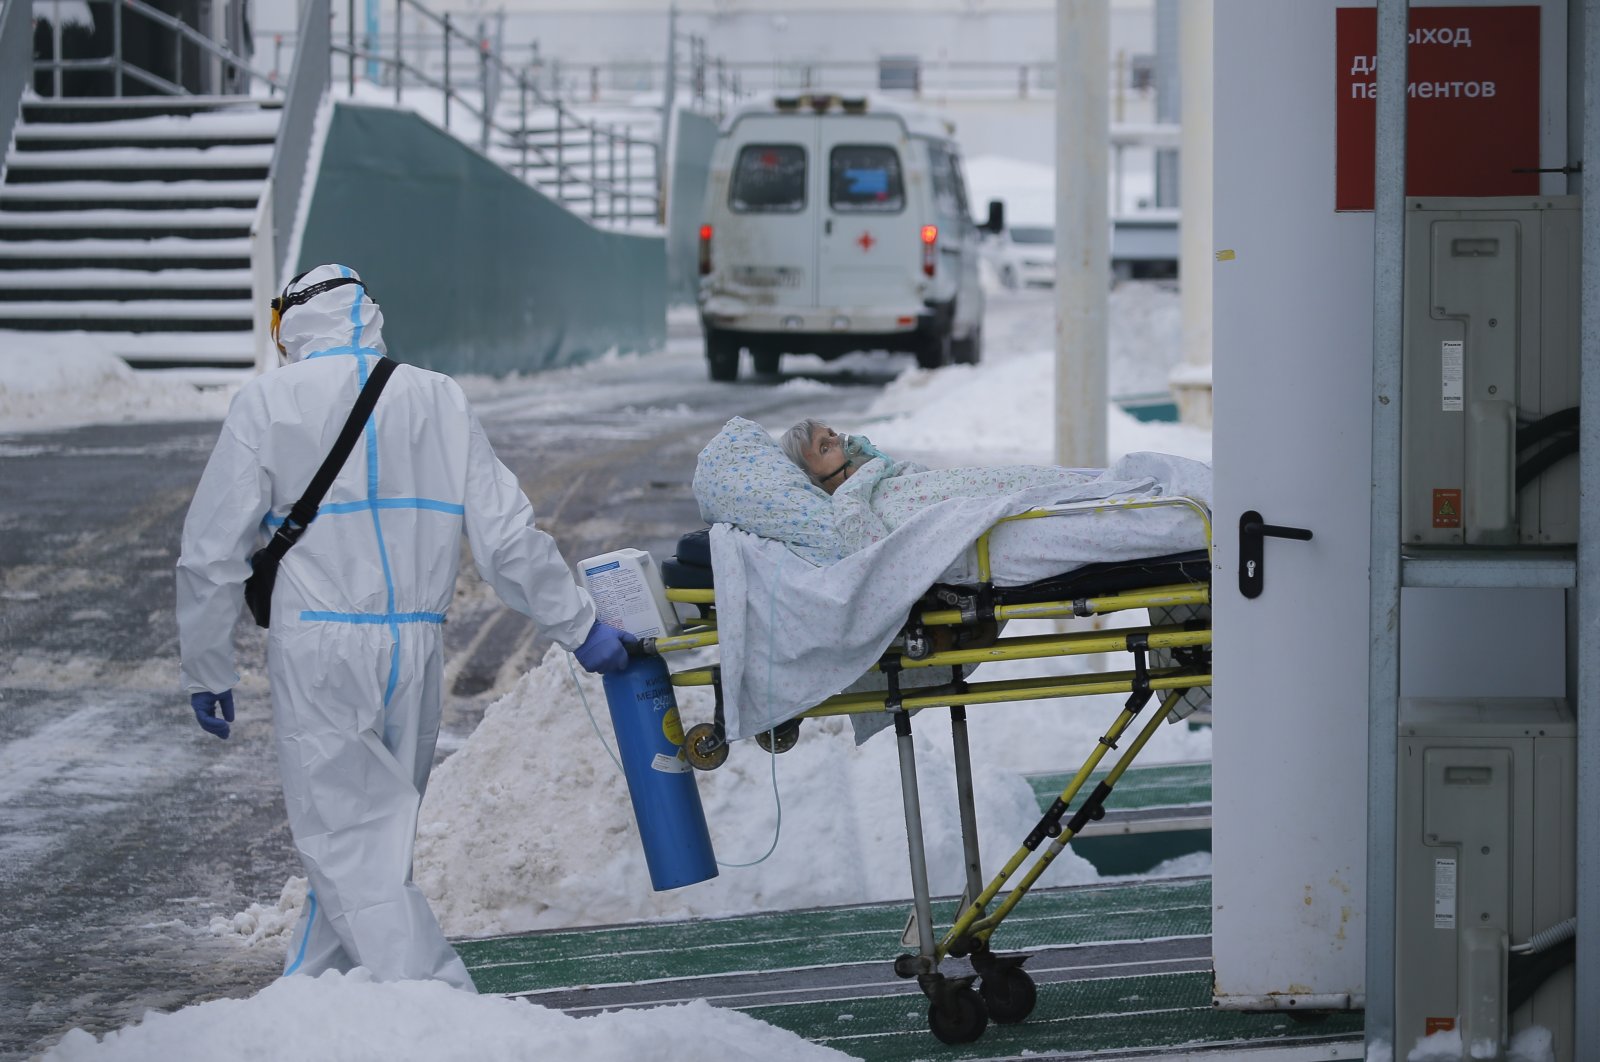 Medical workers carry a patient suspected of having coronavirus on a stretcher at a hospital in Kommunarka, outside Moscow, Russia, Jan. 29, 2022. (AP Photo)